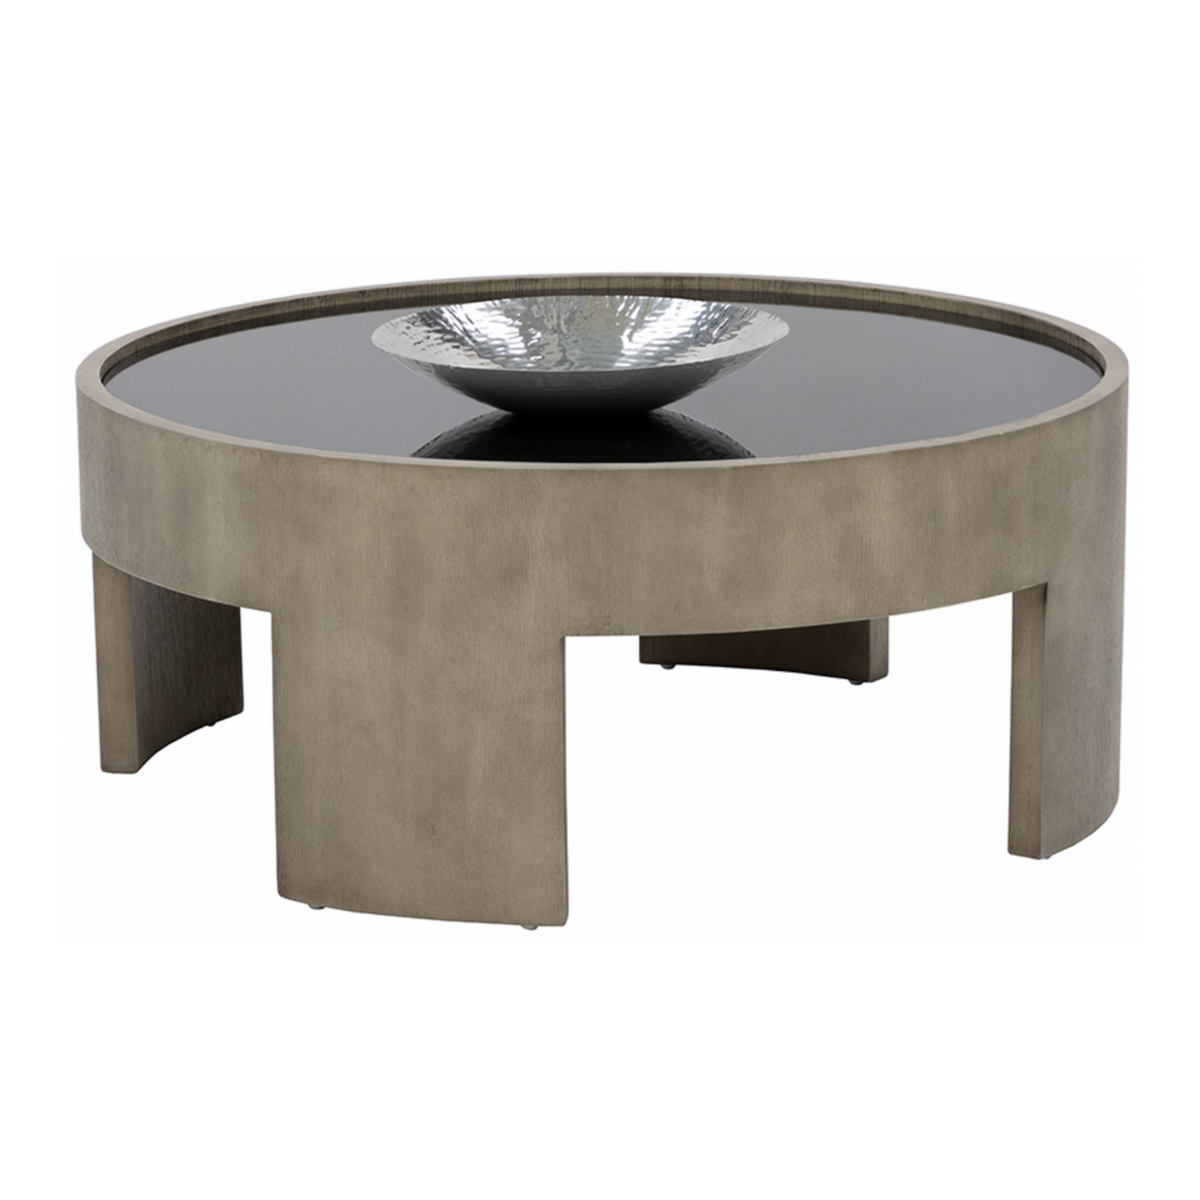 Brunetto Coffee Table - Small